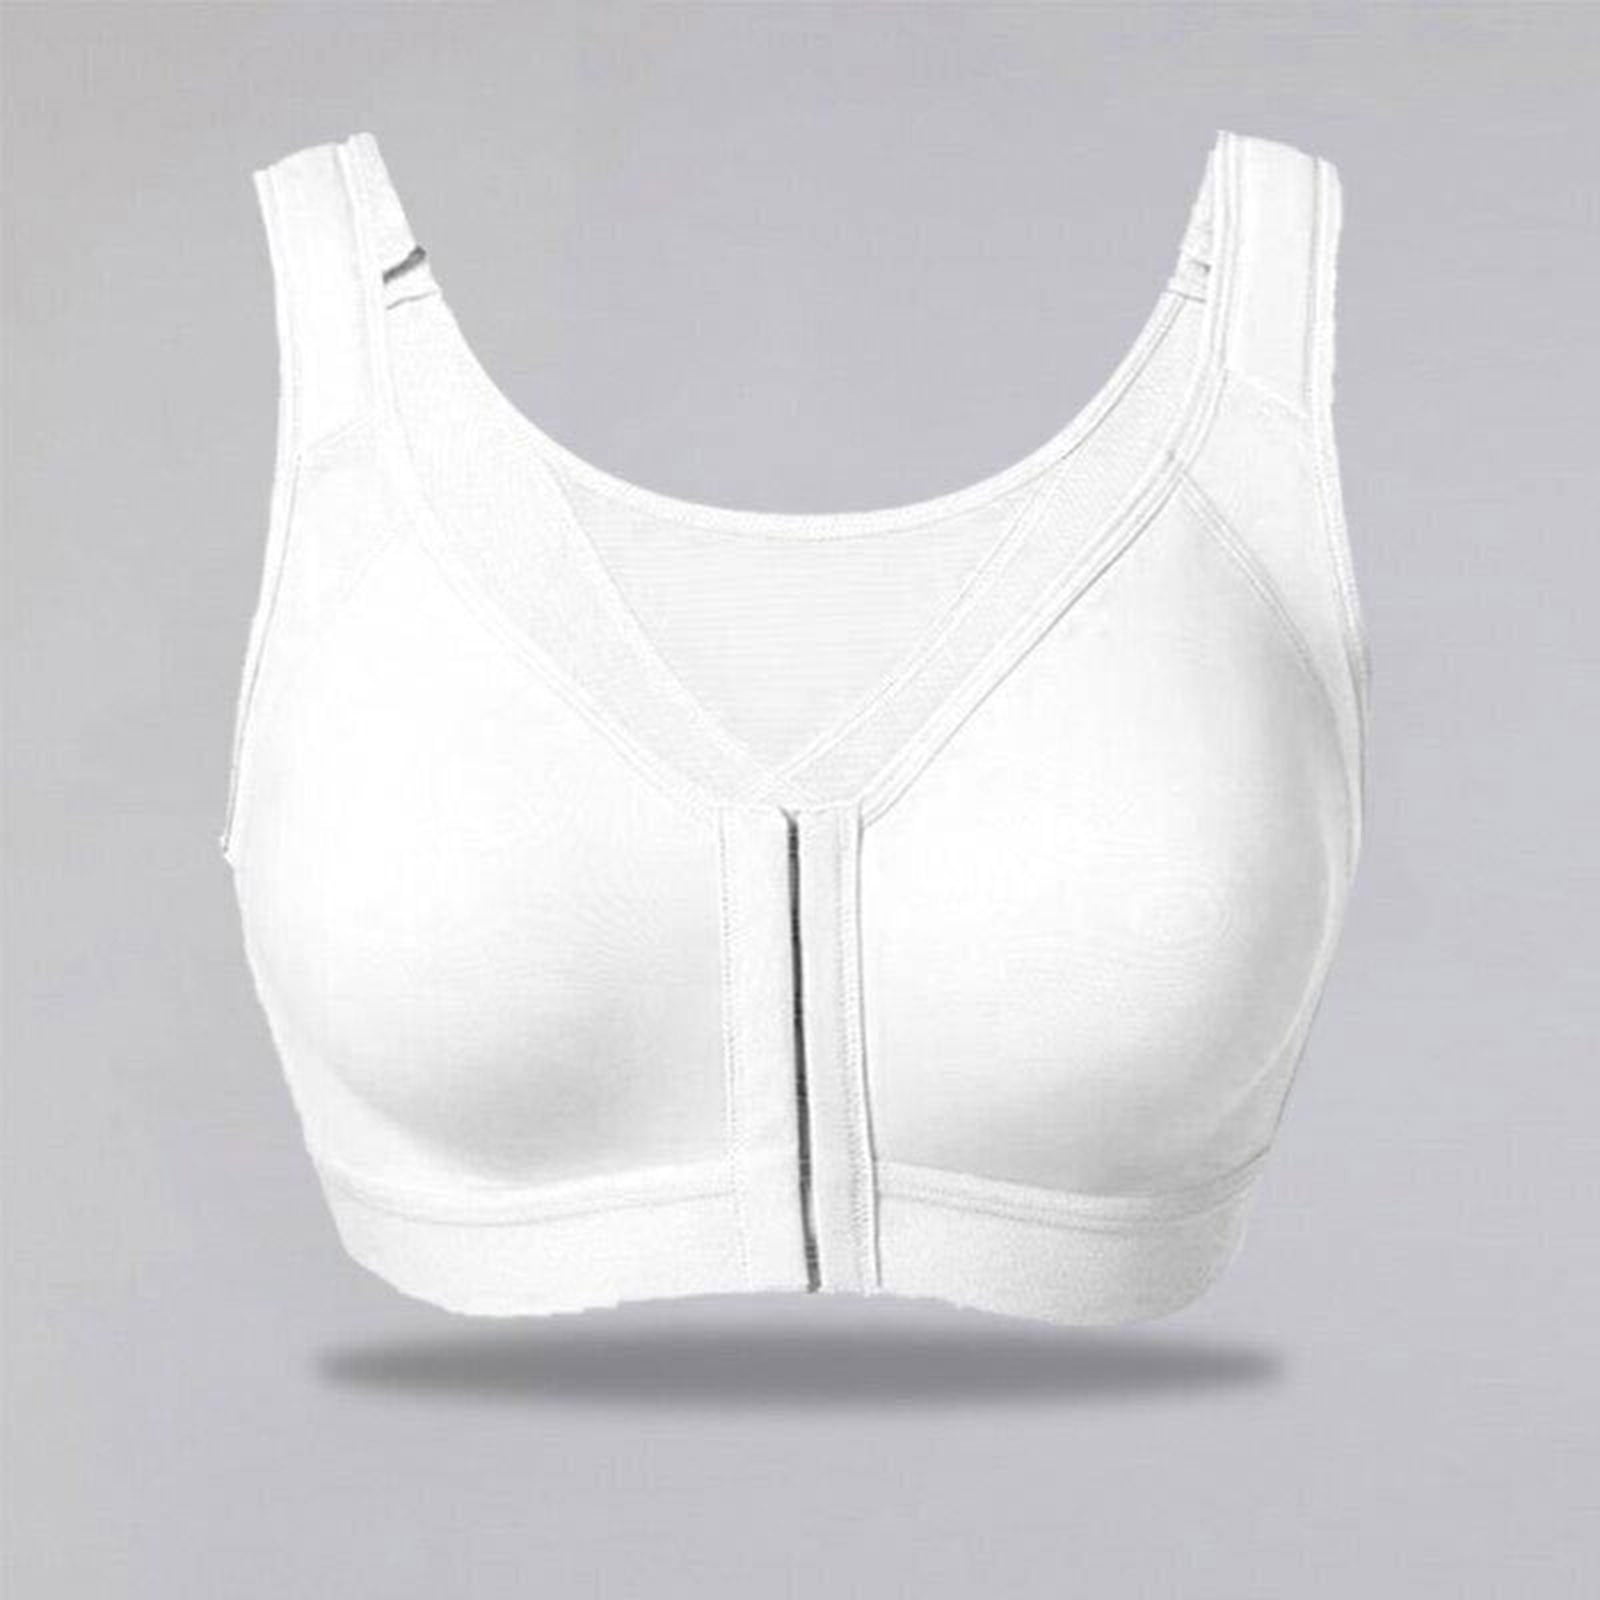 Ozmmyan Wirefree Bras for Women ,Plus Size Adjustable Shoulder Straps  Lace Bra Wirefreee Extra-Elastic Bra Active Yoga Sports Bras 38B/C-46B/C,  Summer Savings Clearance 